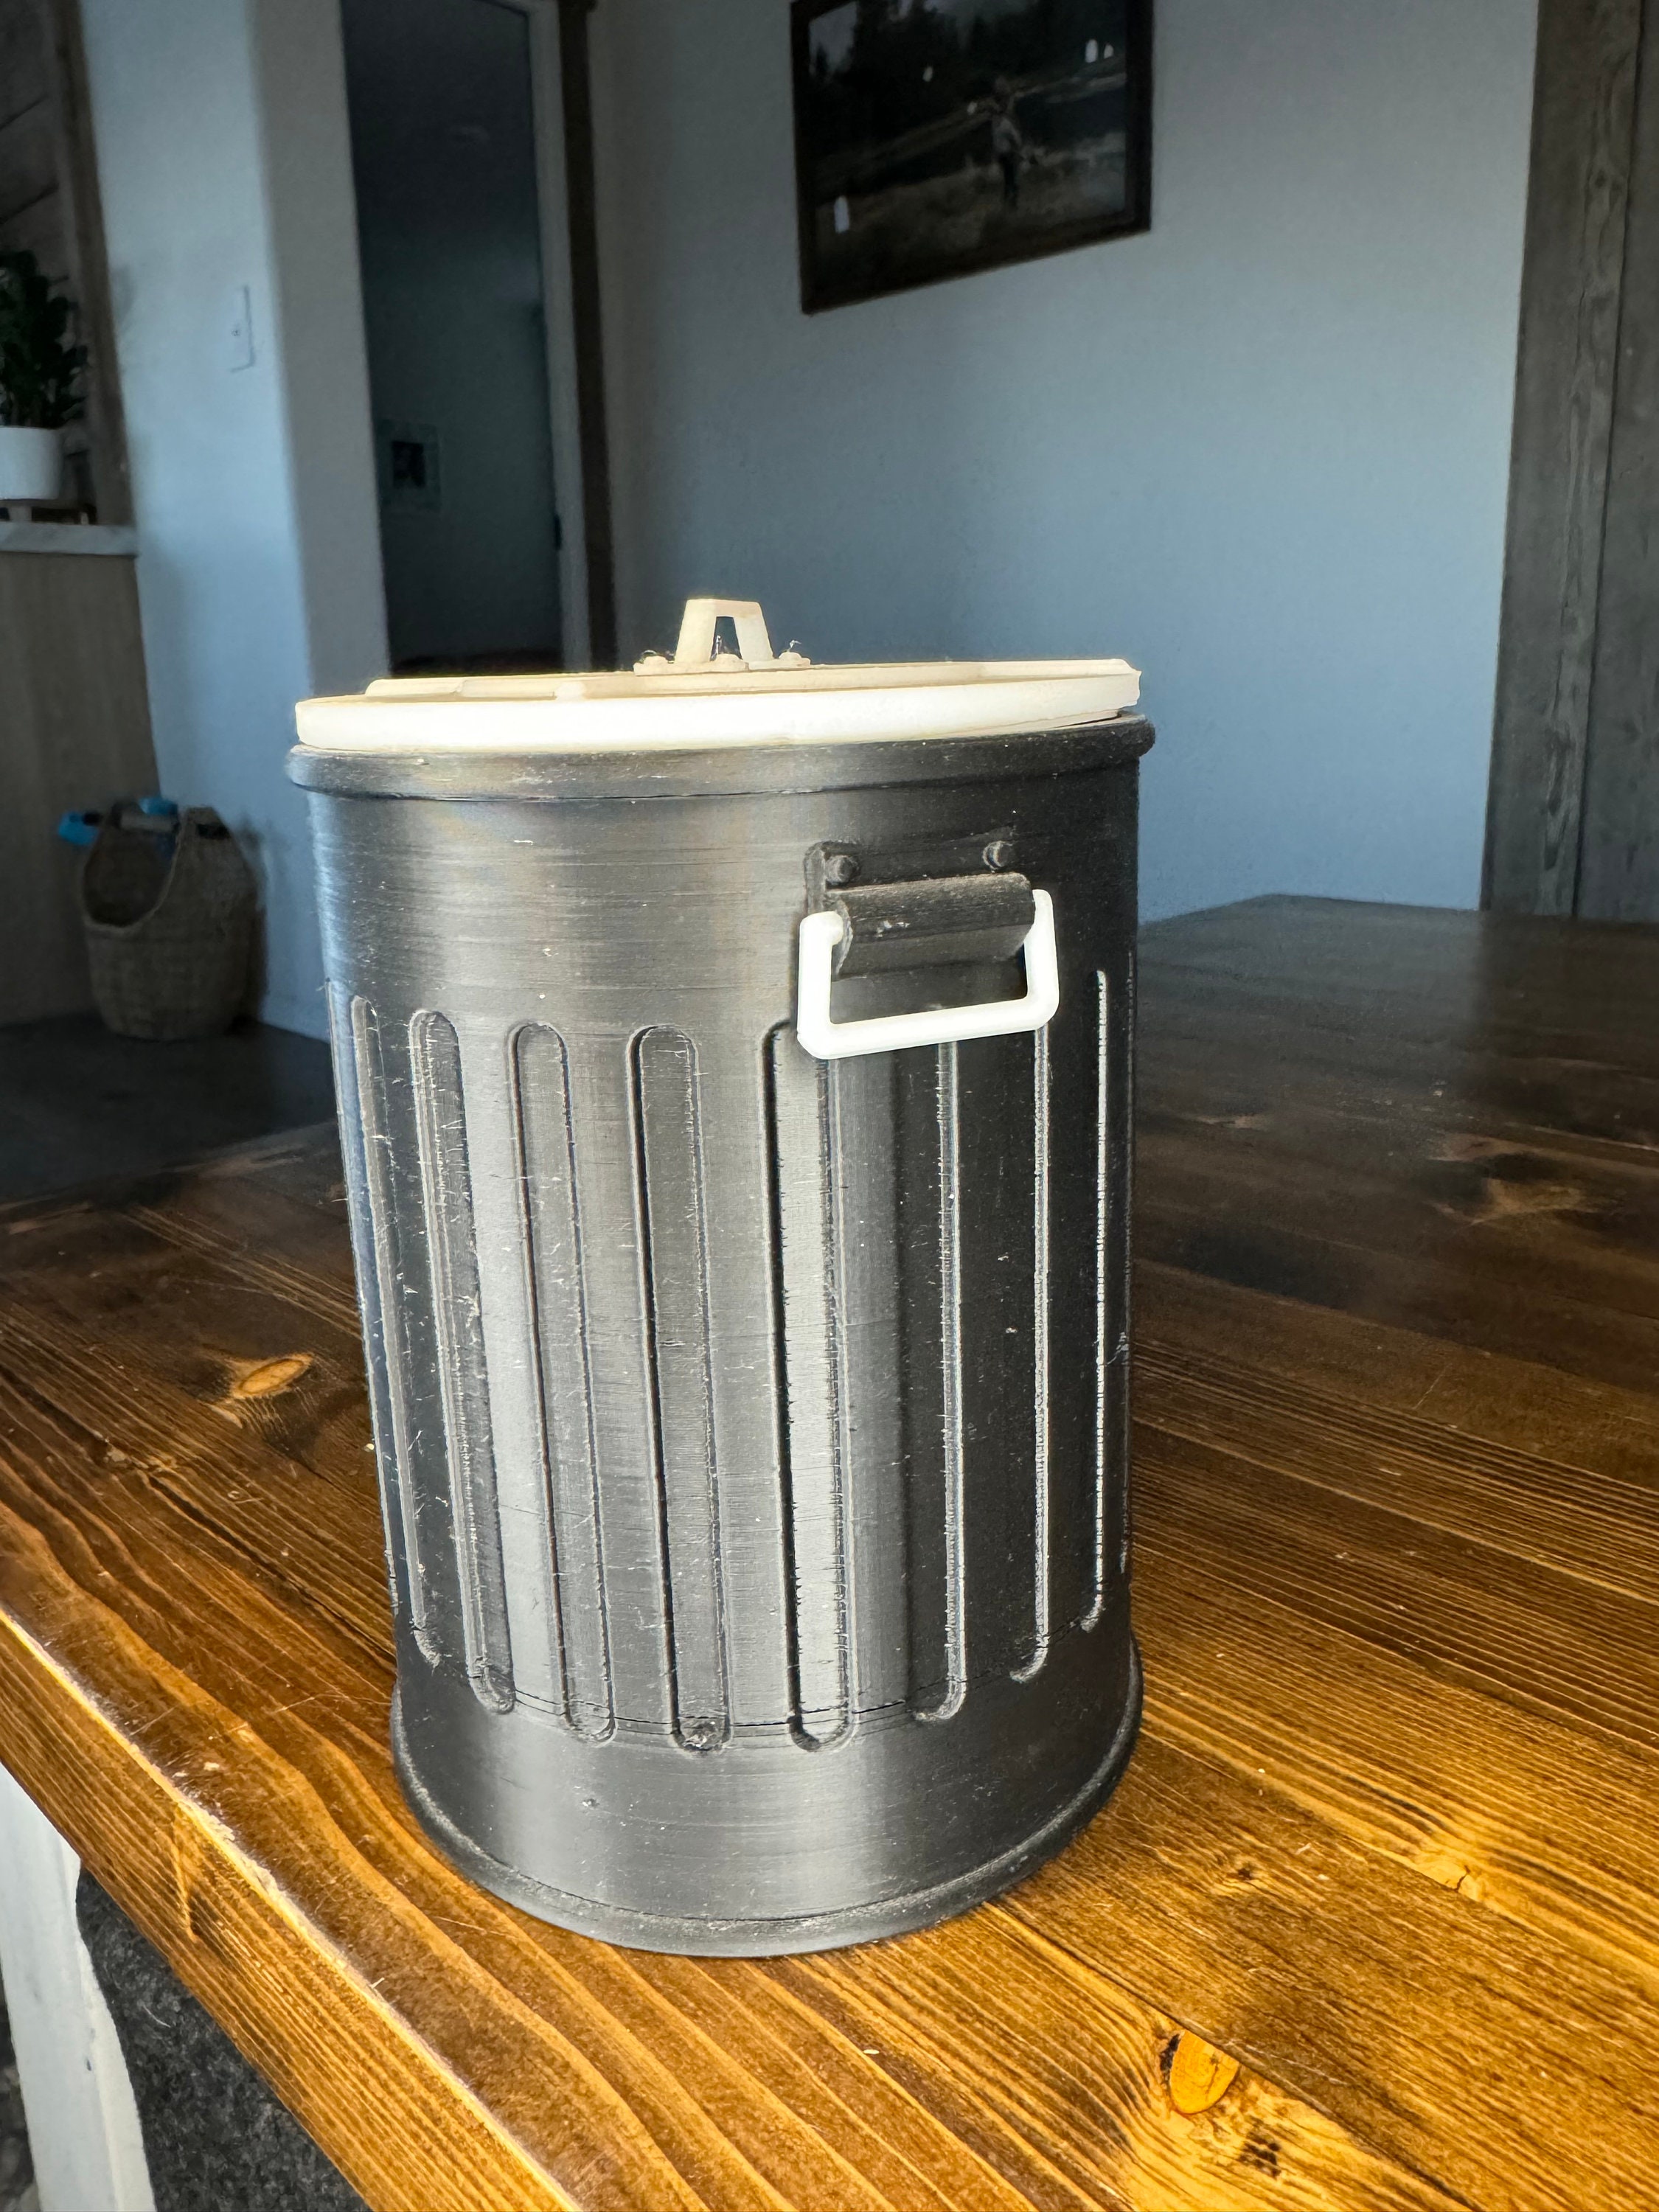 How to Make REALISTIC Miniature Metal Trash Cans & Garbage Bags